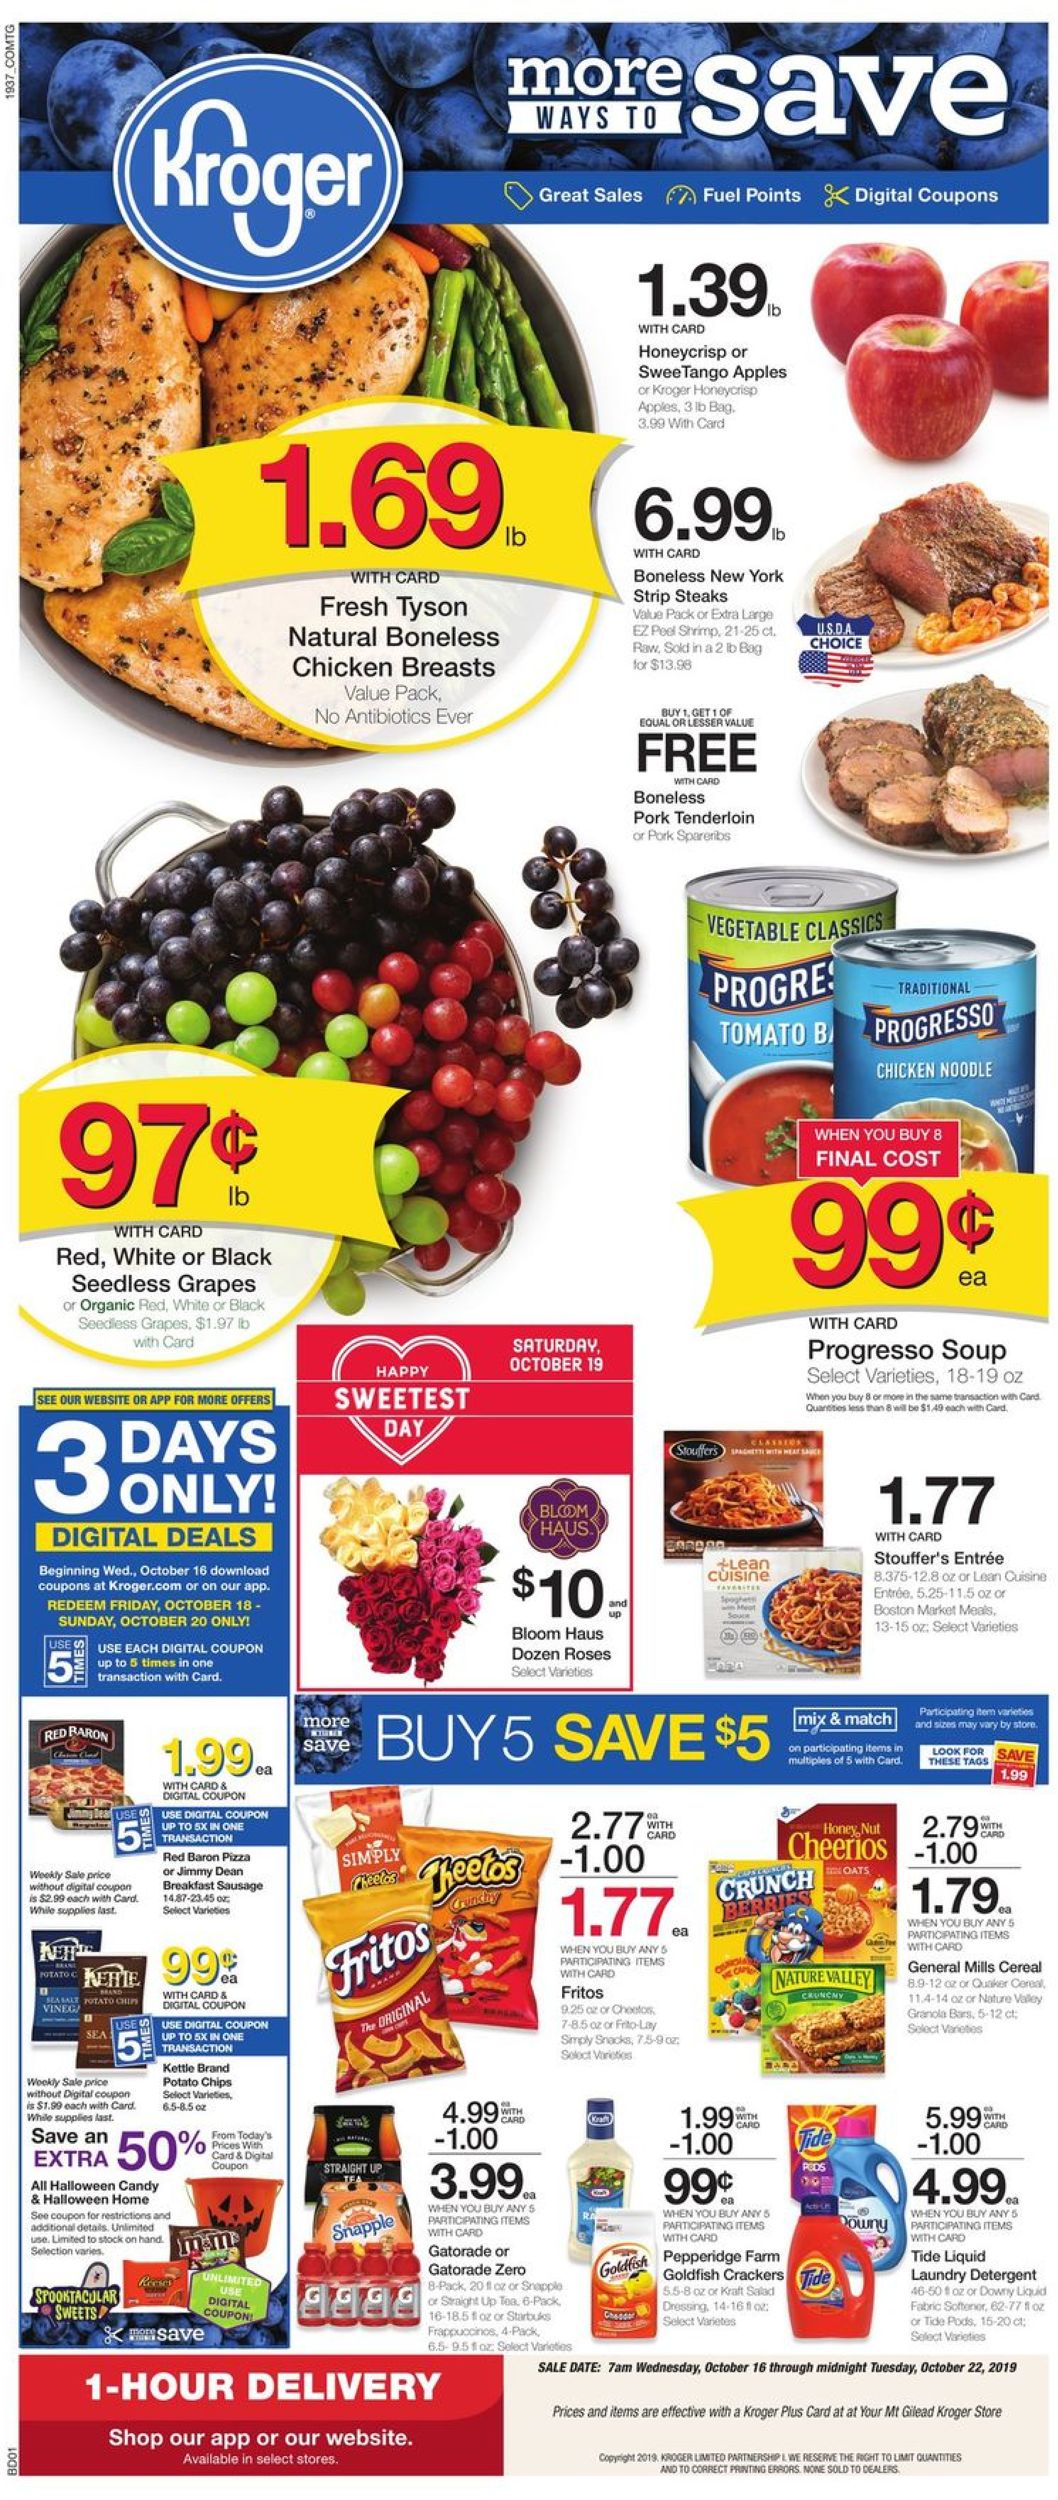 Kroger Current weekly ad 10/16 - 10/22/2019 - frequent-ads.com